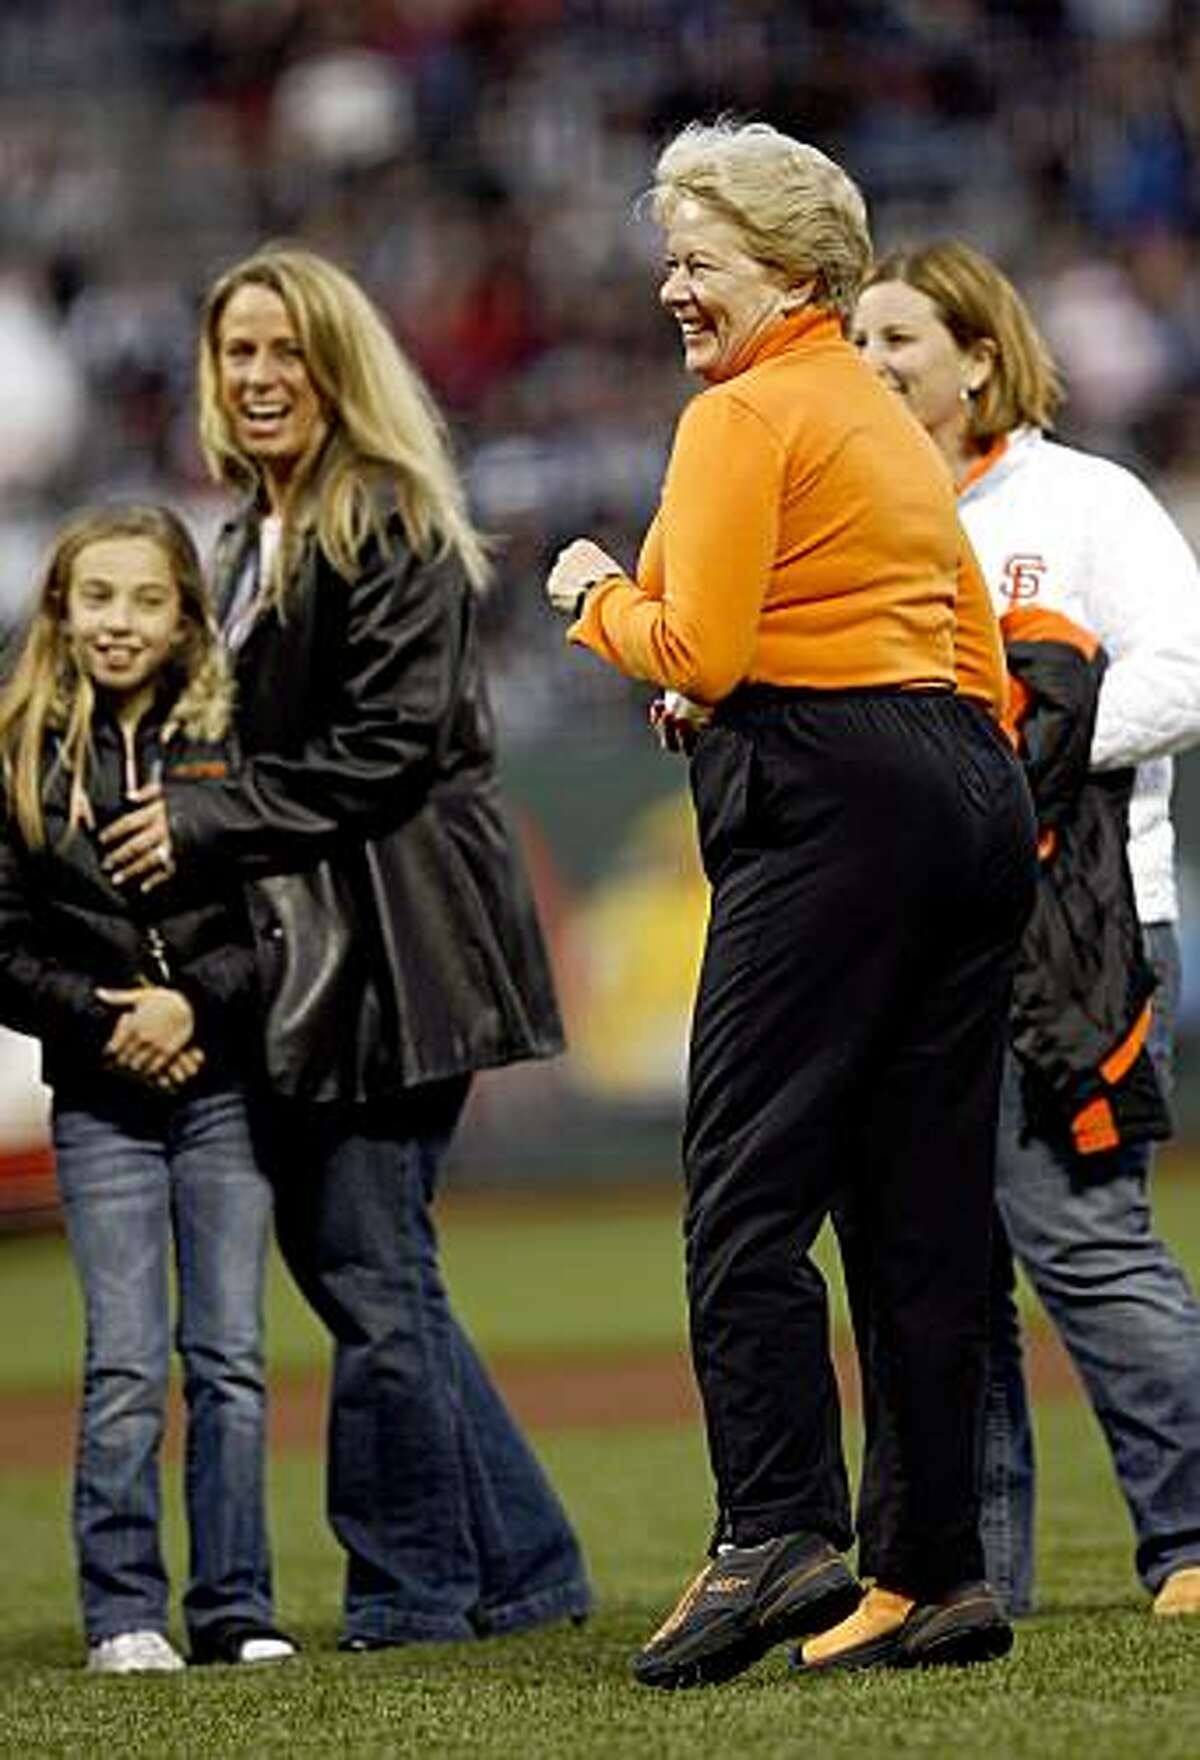 In this April 4, 2007, photo, San Francisco Giants' owner Sue Burns prepares to throw the first pitch in honor of her late husband, Harmon Burns, who had died the previous year, at a baseball game in San Francisco, Calif. Sue Burns, a part owner of the Giants, died late Saturday, July 18, 2009. Burns, 58, died of complications from cancer, team spokesman Jim Moorehead said Sunday.